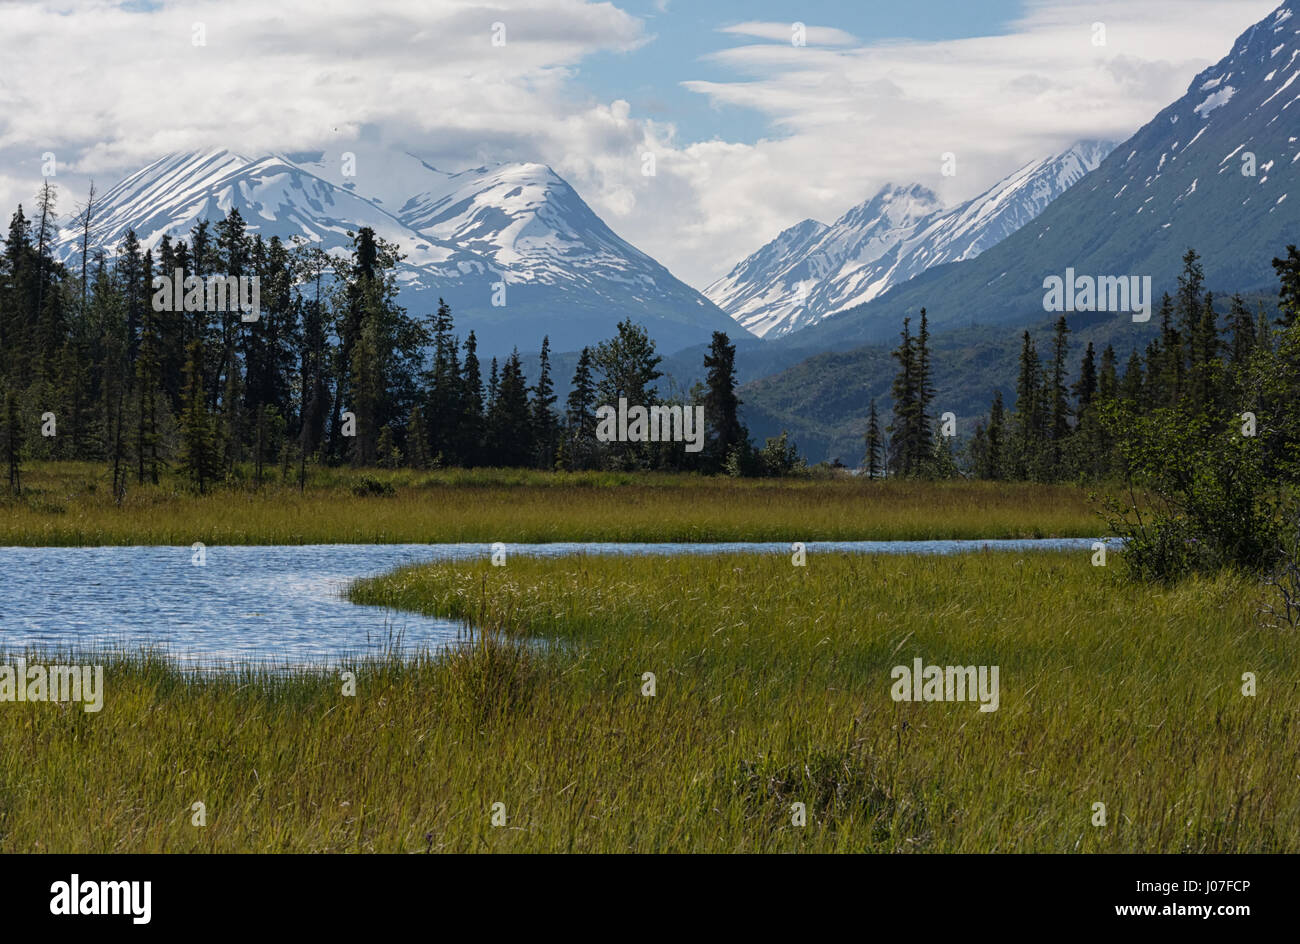 A wide stream flows through a field of marsh grass towards the distant snow-capped Keani Mountains in South Central Alaska. Stock Photo